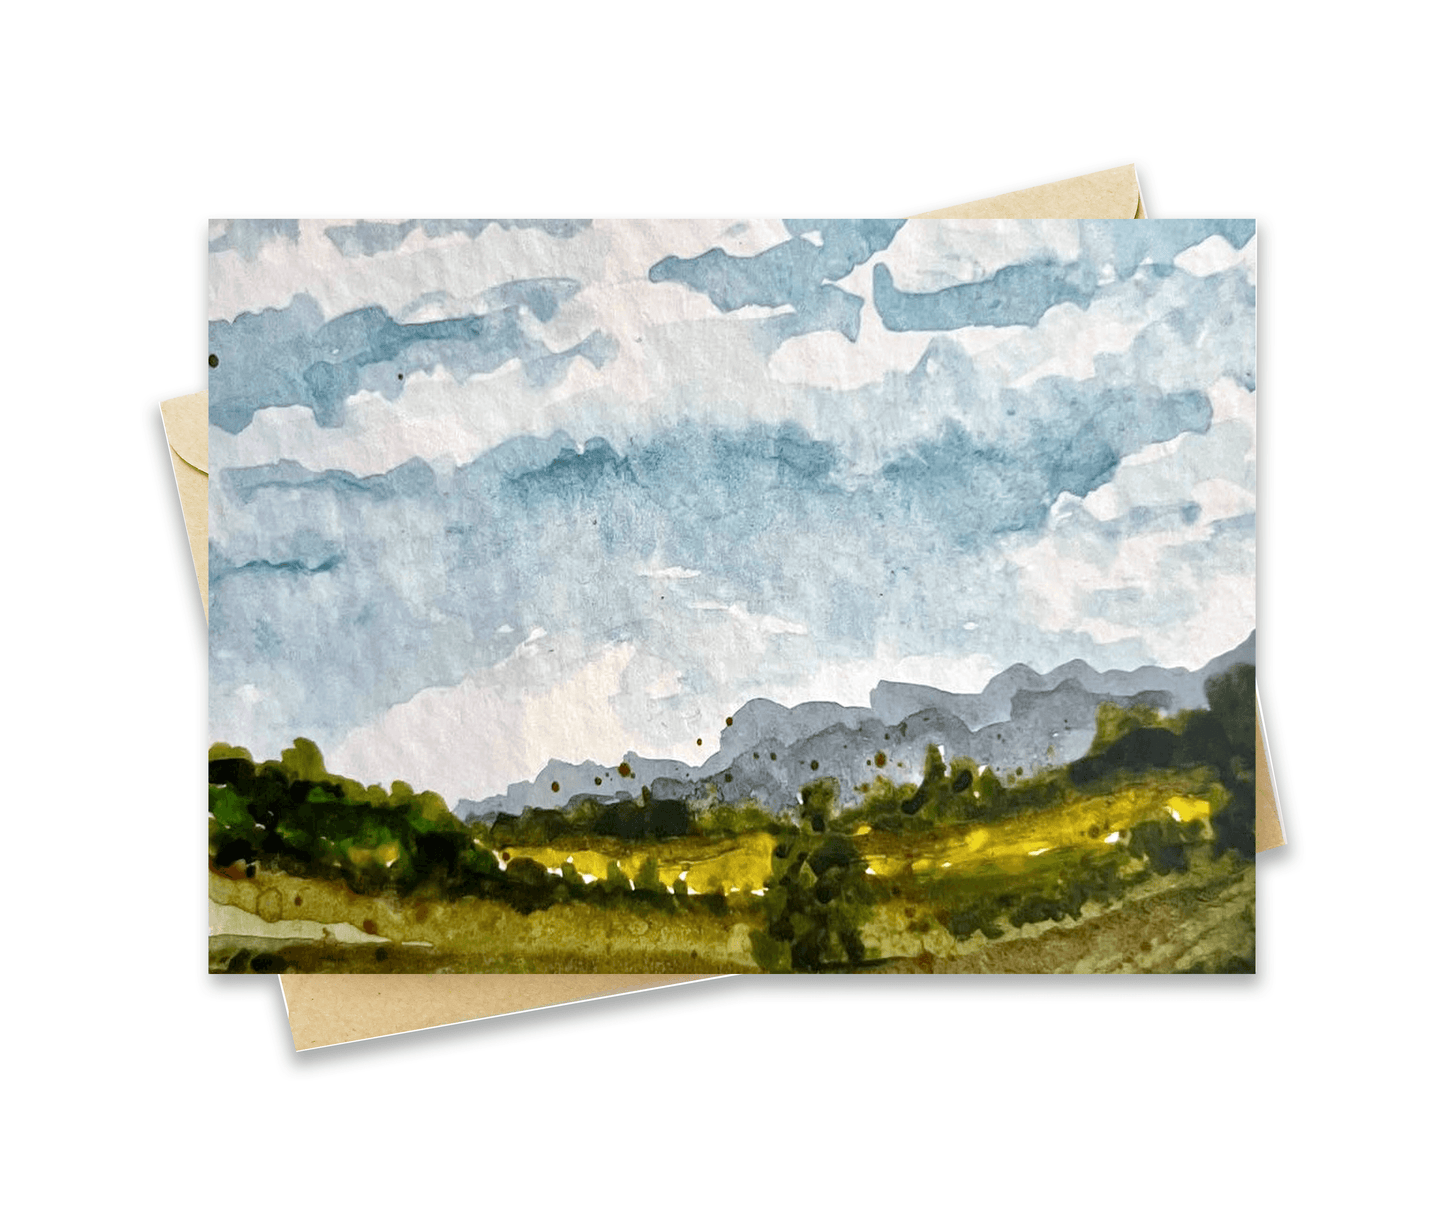 BellavanceInk: Greeting Card Blue Ridge Mountains And Valleys In Nelson County Watercolor Landscape 5 x 7 Inches - BellavanceInk